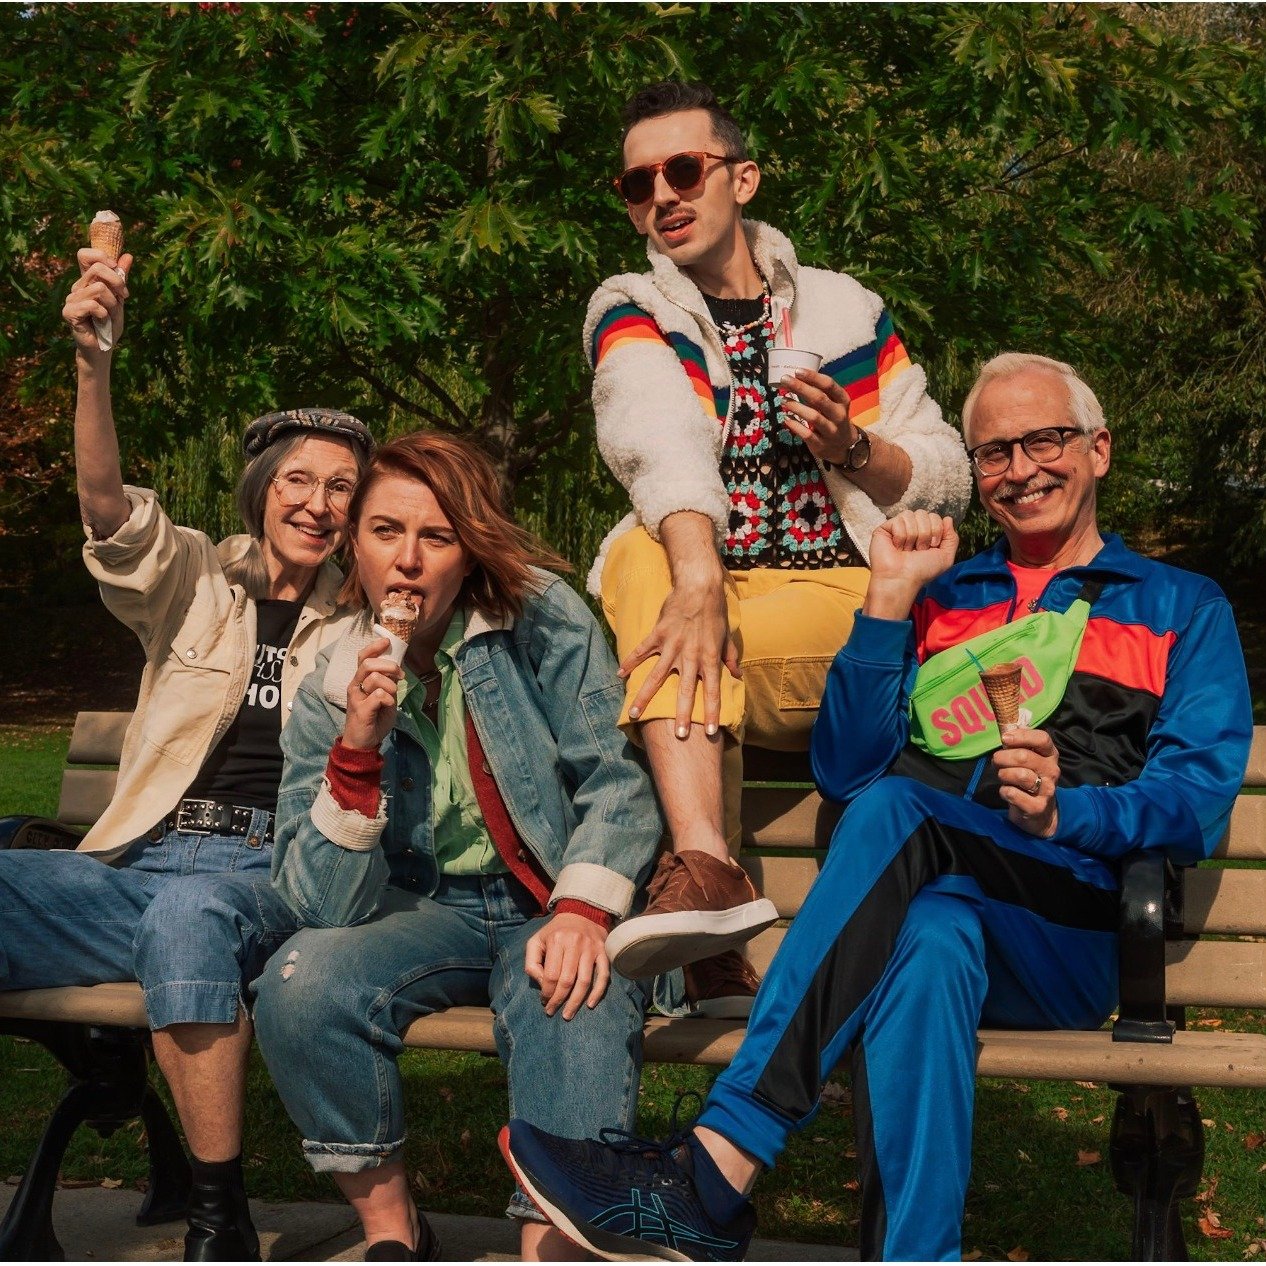 @insideoutfestival just announced they're line up and we're so excited for the premiere of Stories of My Gay Grandparents, starring our own James Kall!

Make sure to get tickets for the premiere screening May 29, Congrats James! We can't wait to tune